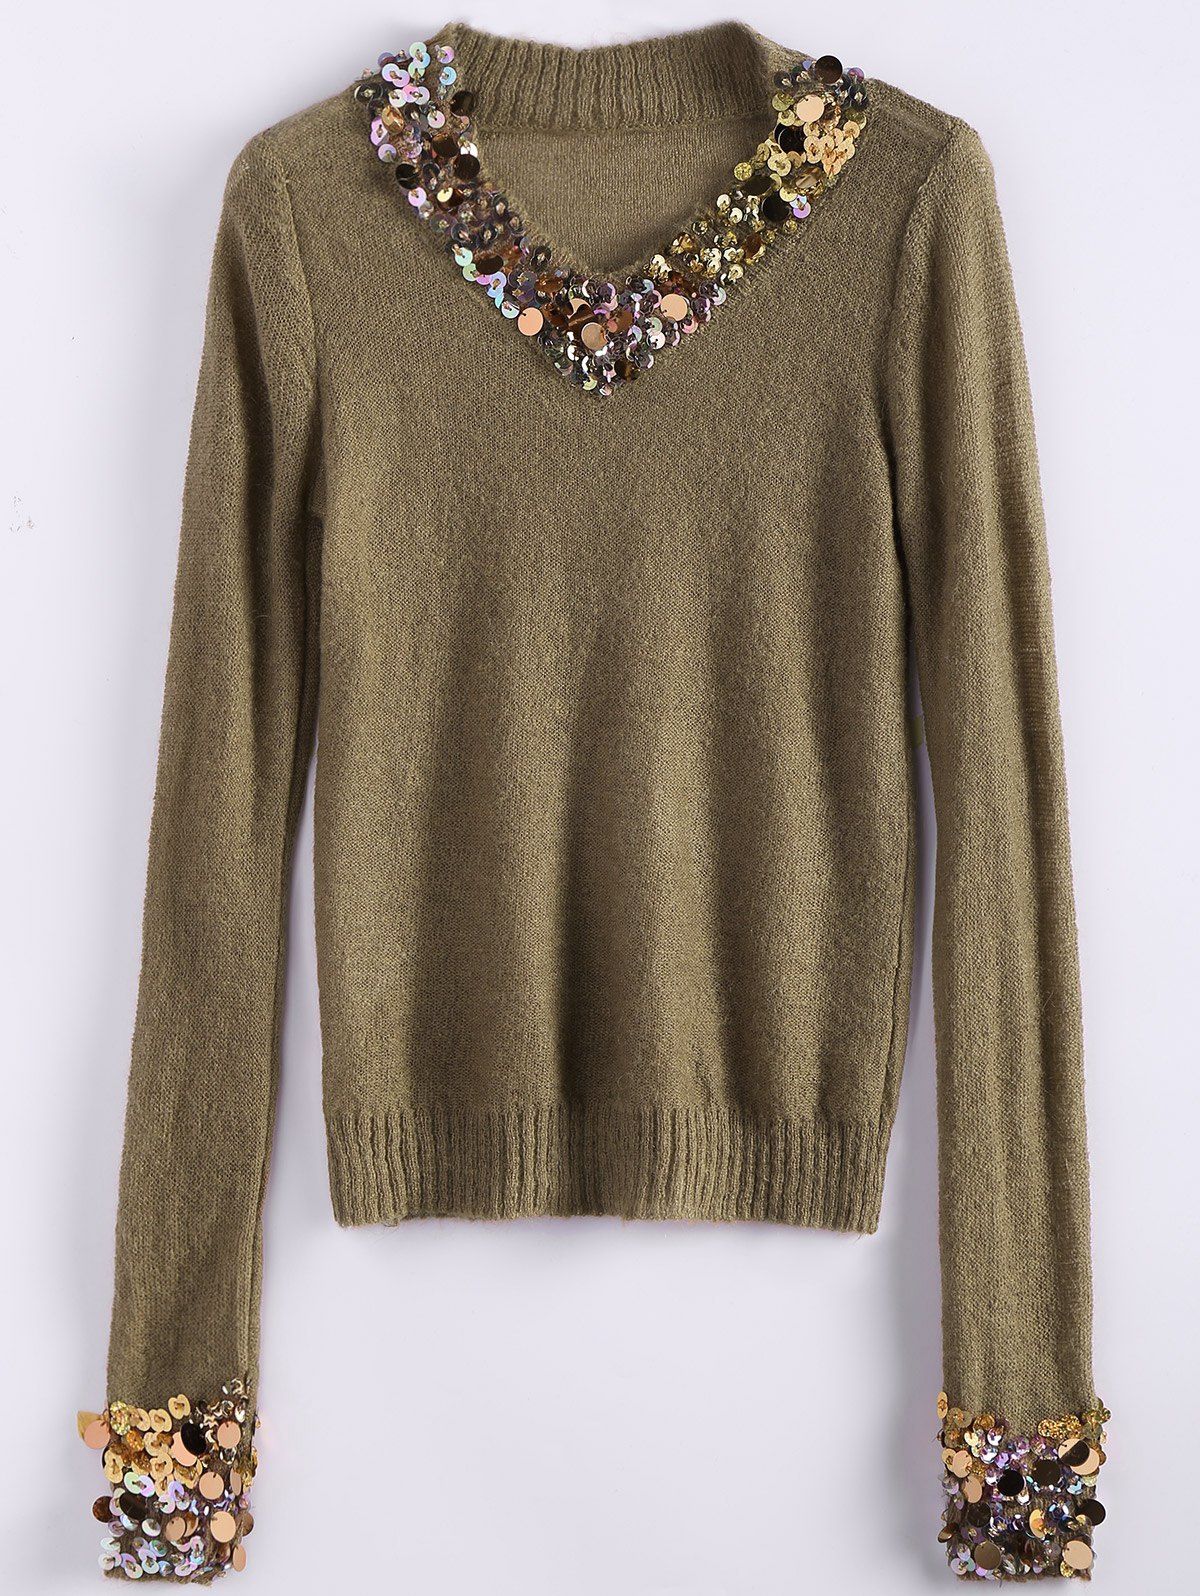 V Neck Sequins Tunic Sweater - CAMEL ONE SIZE